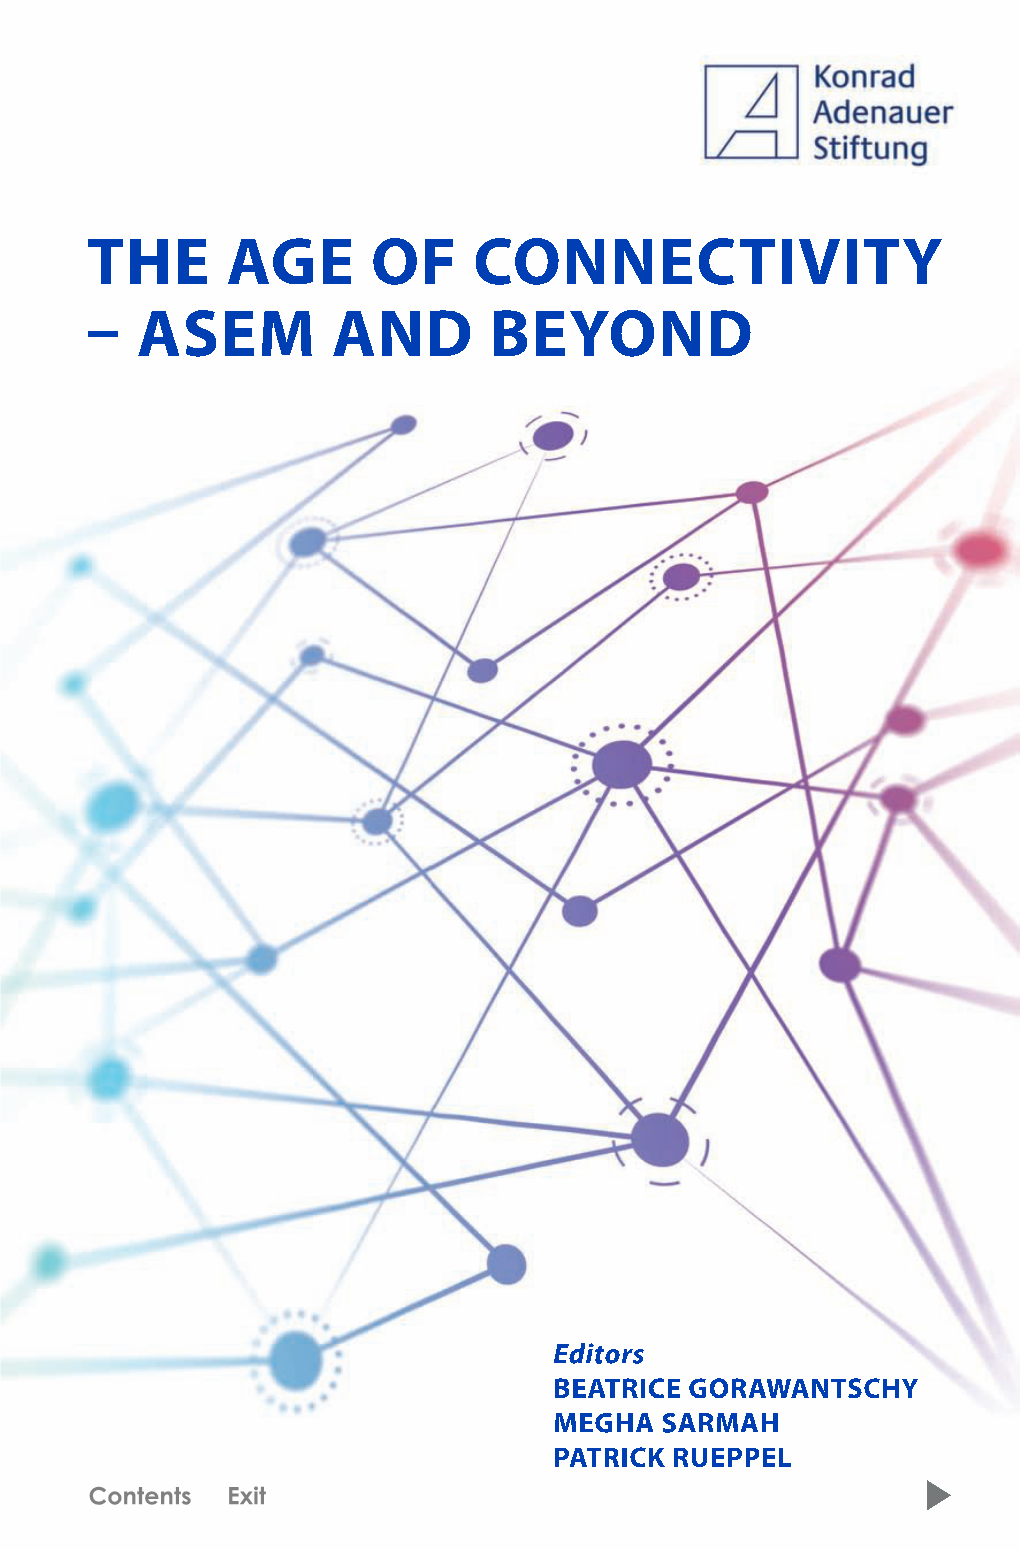 The Age of Connectivity – ASEM and Beyond